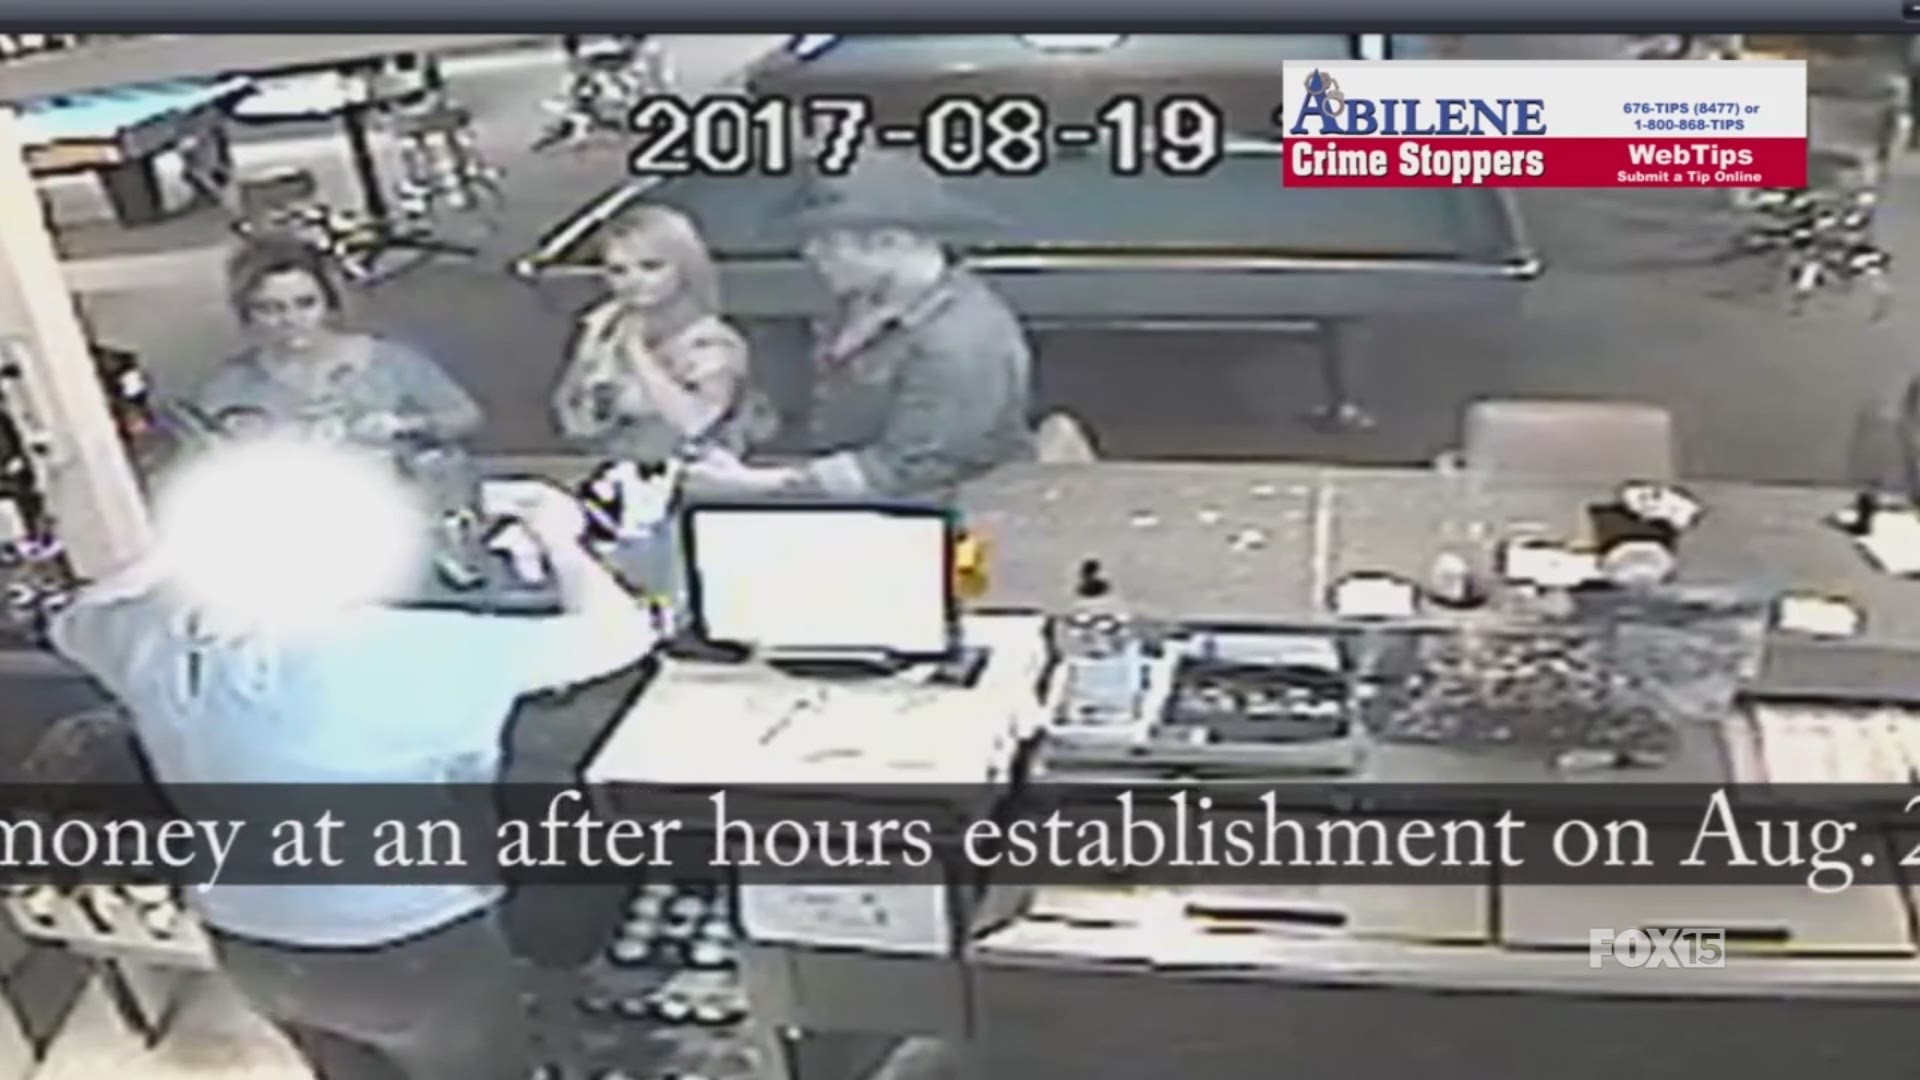 ABILENE, TX - APD is asking for help in identifying suspects accused of passing fake money at a south Abilene pool hall.